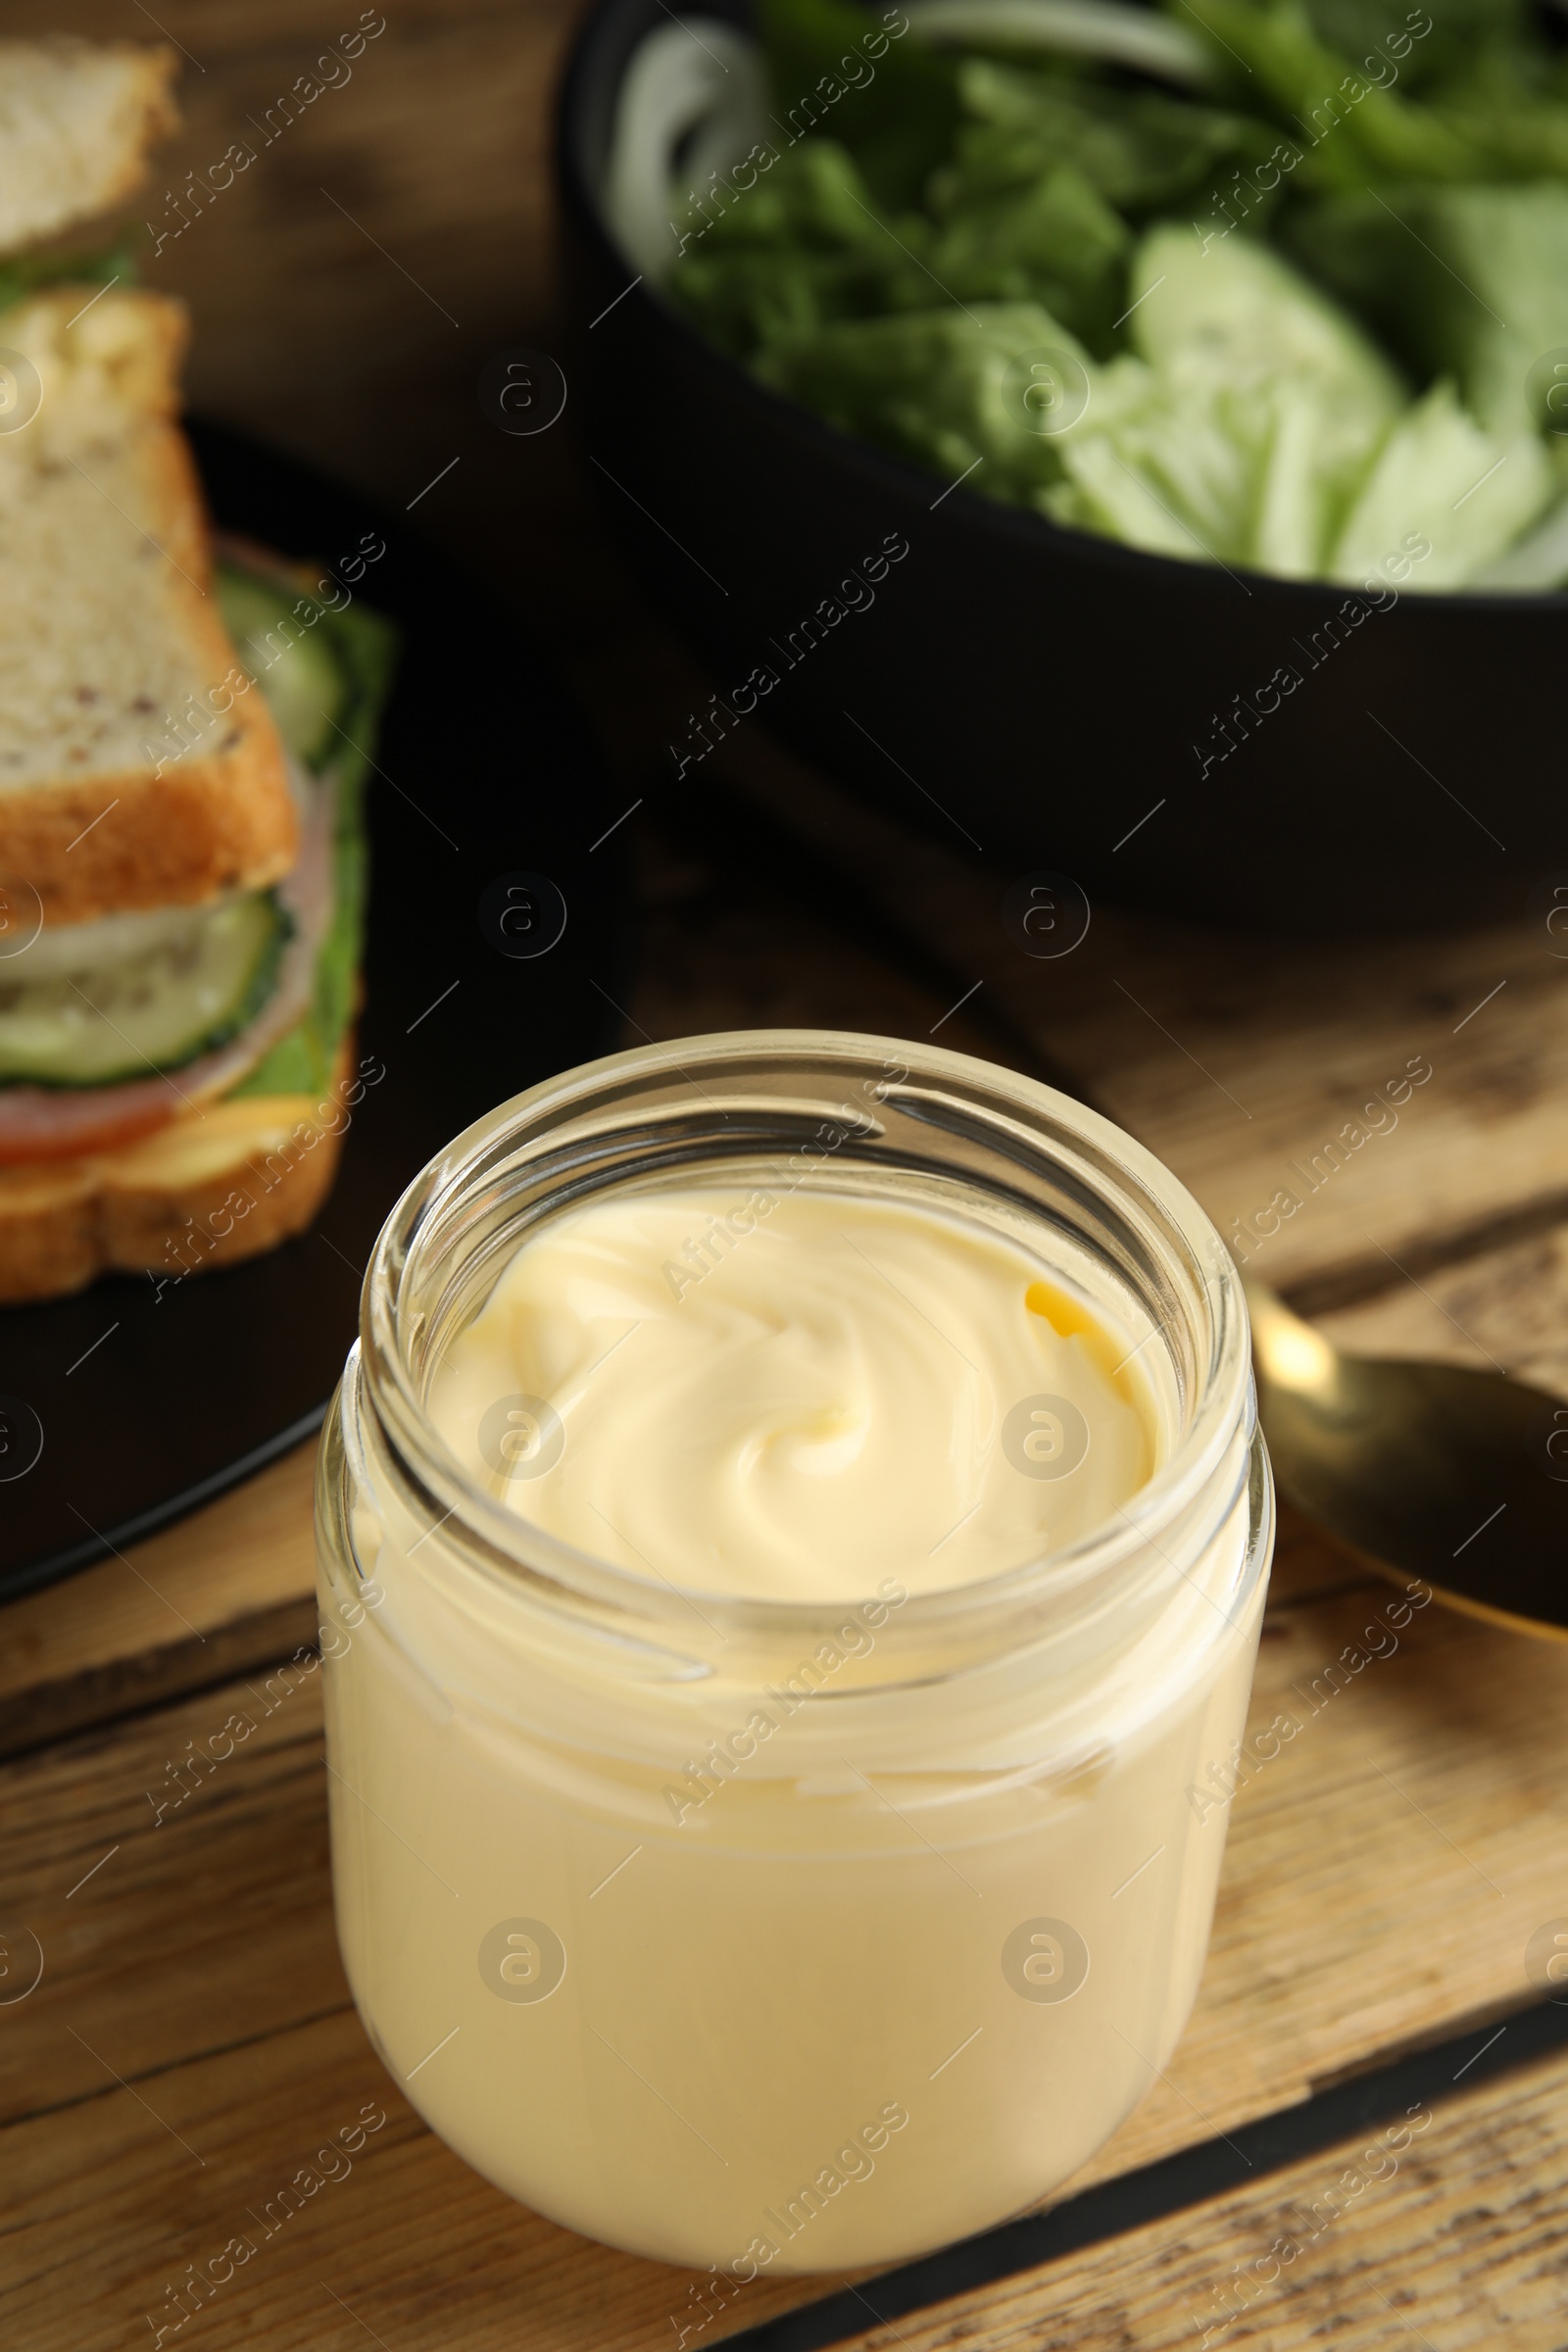 Photo of Jar of delicious mayonnaise near fresh sandwiches on wooden table